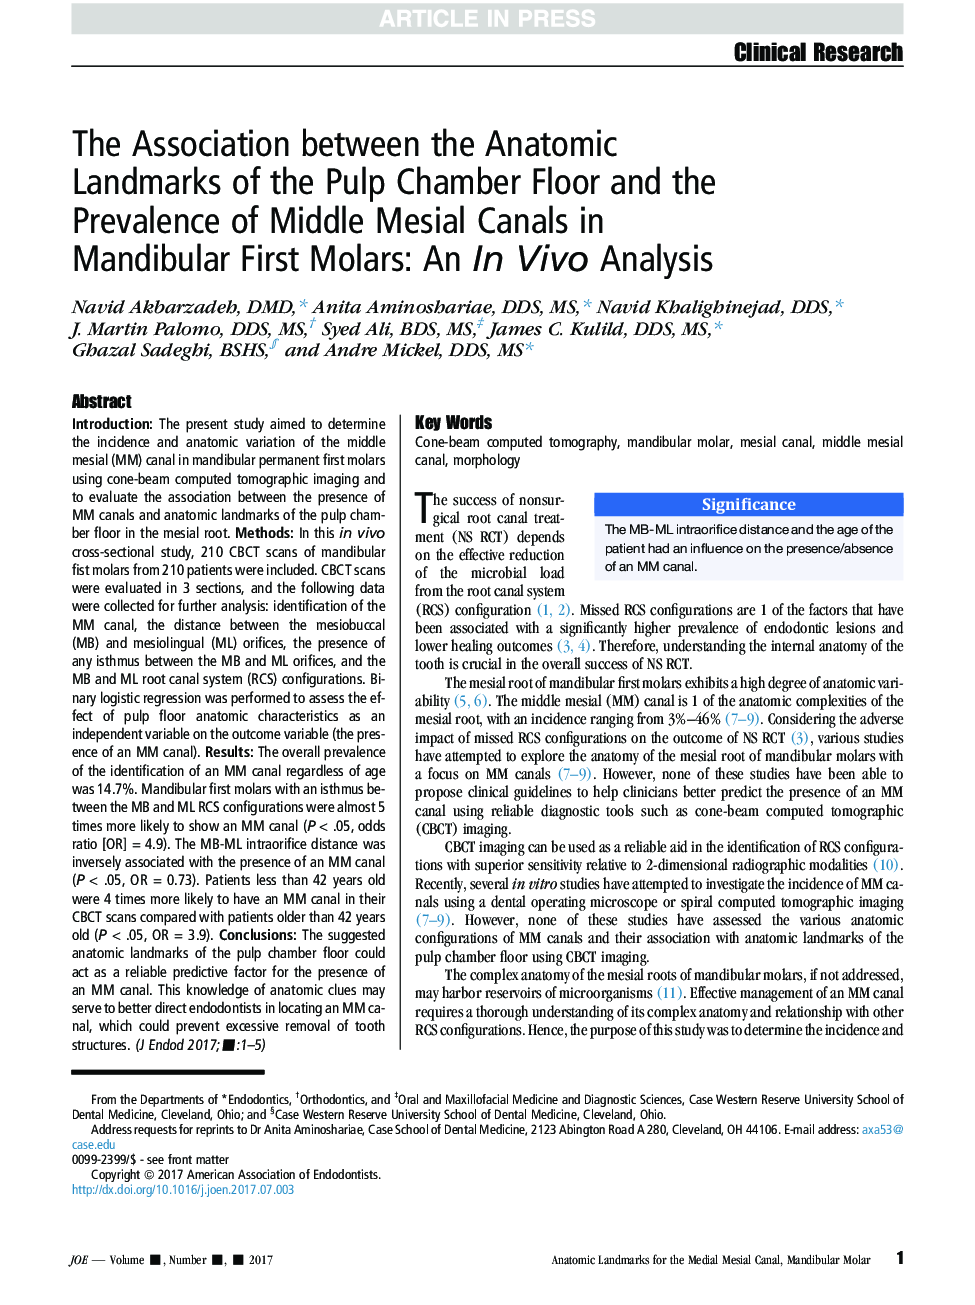 The Association between the Anatomic Landmarks of the Pulp Chamber Floor and the Prevalence of Middle Mesial Canals in Mandibular First Molars: An InÂ Vivo Analysis